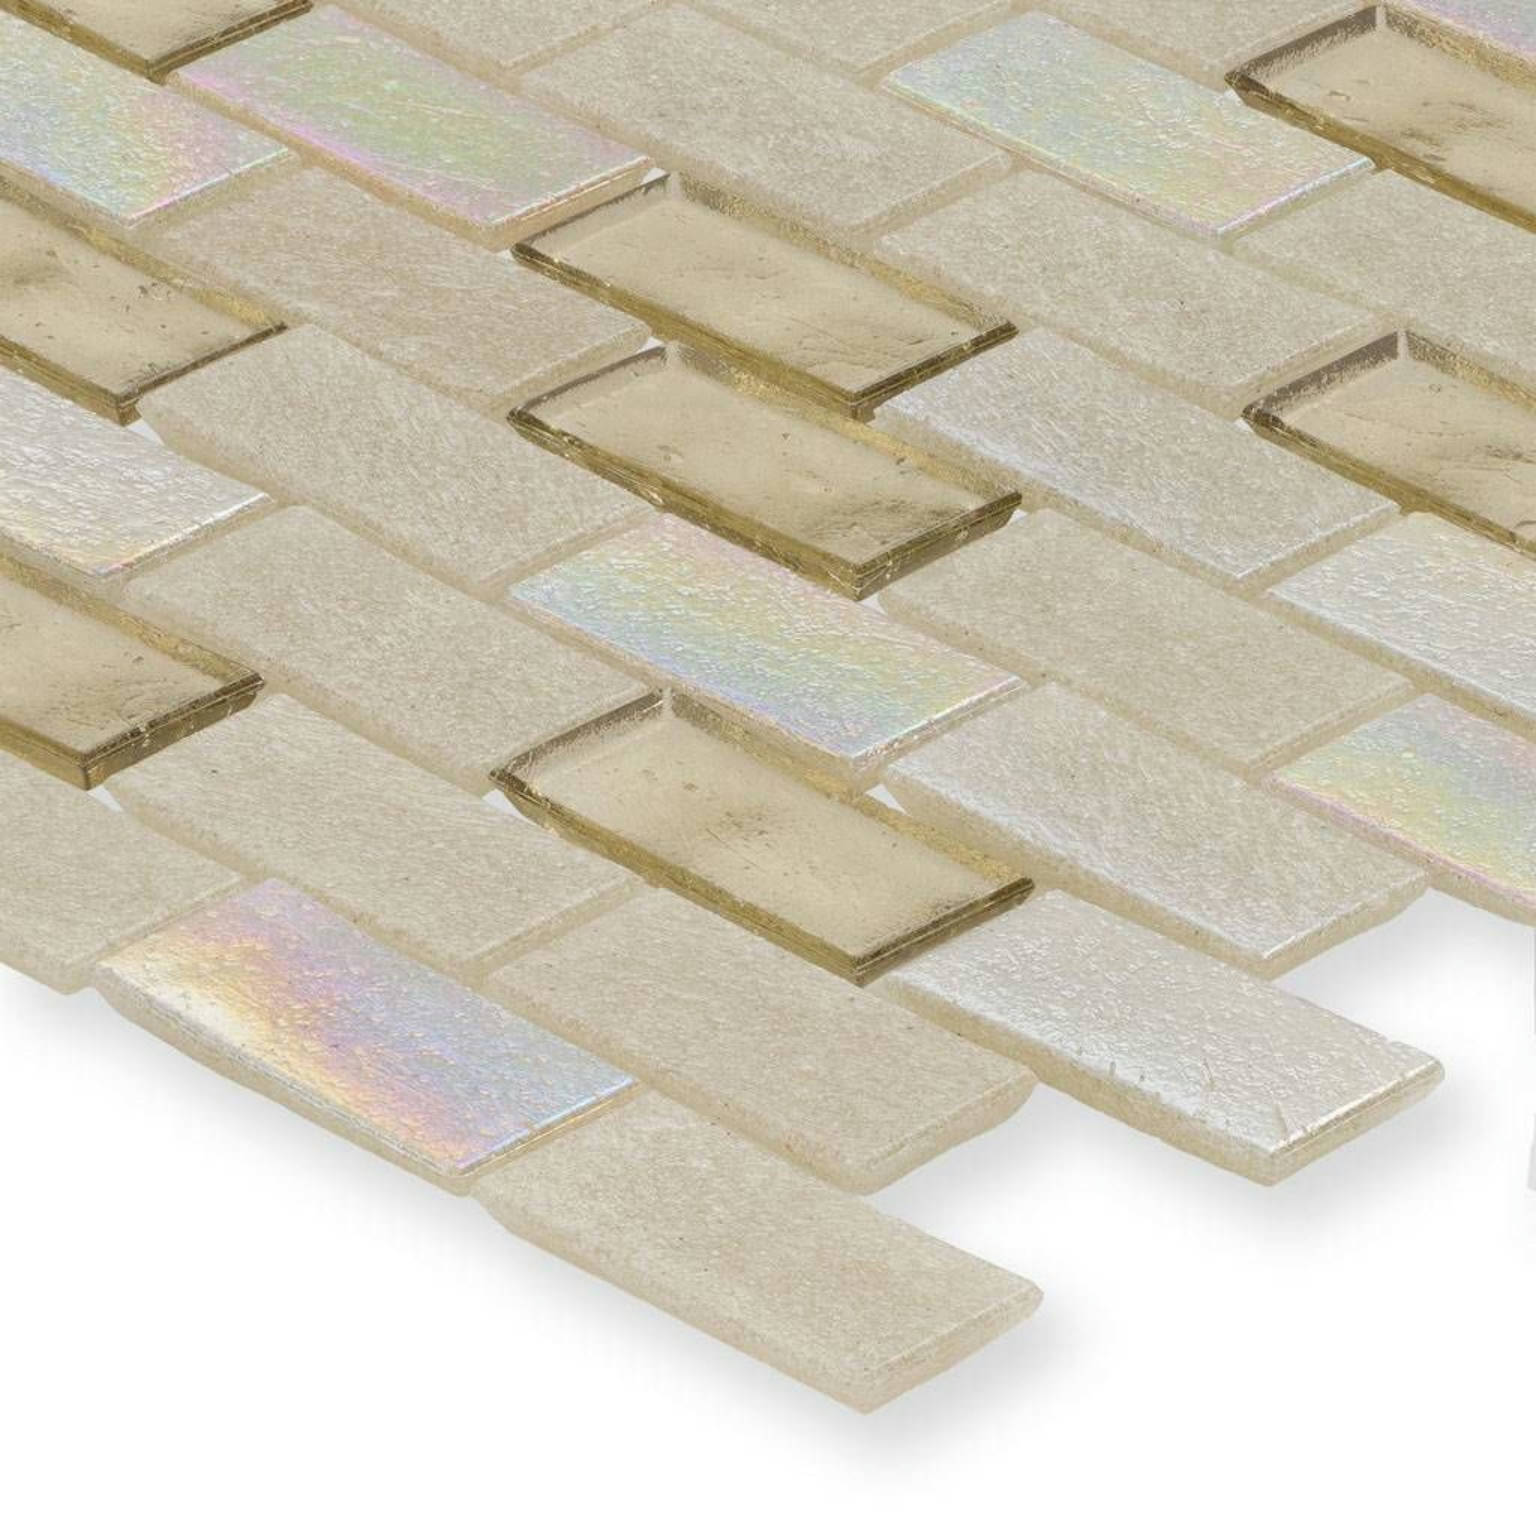 Honeycomb Brick | Stones And More | Finest selection of Mosaics, Glass, Tile and Stone